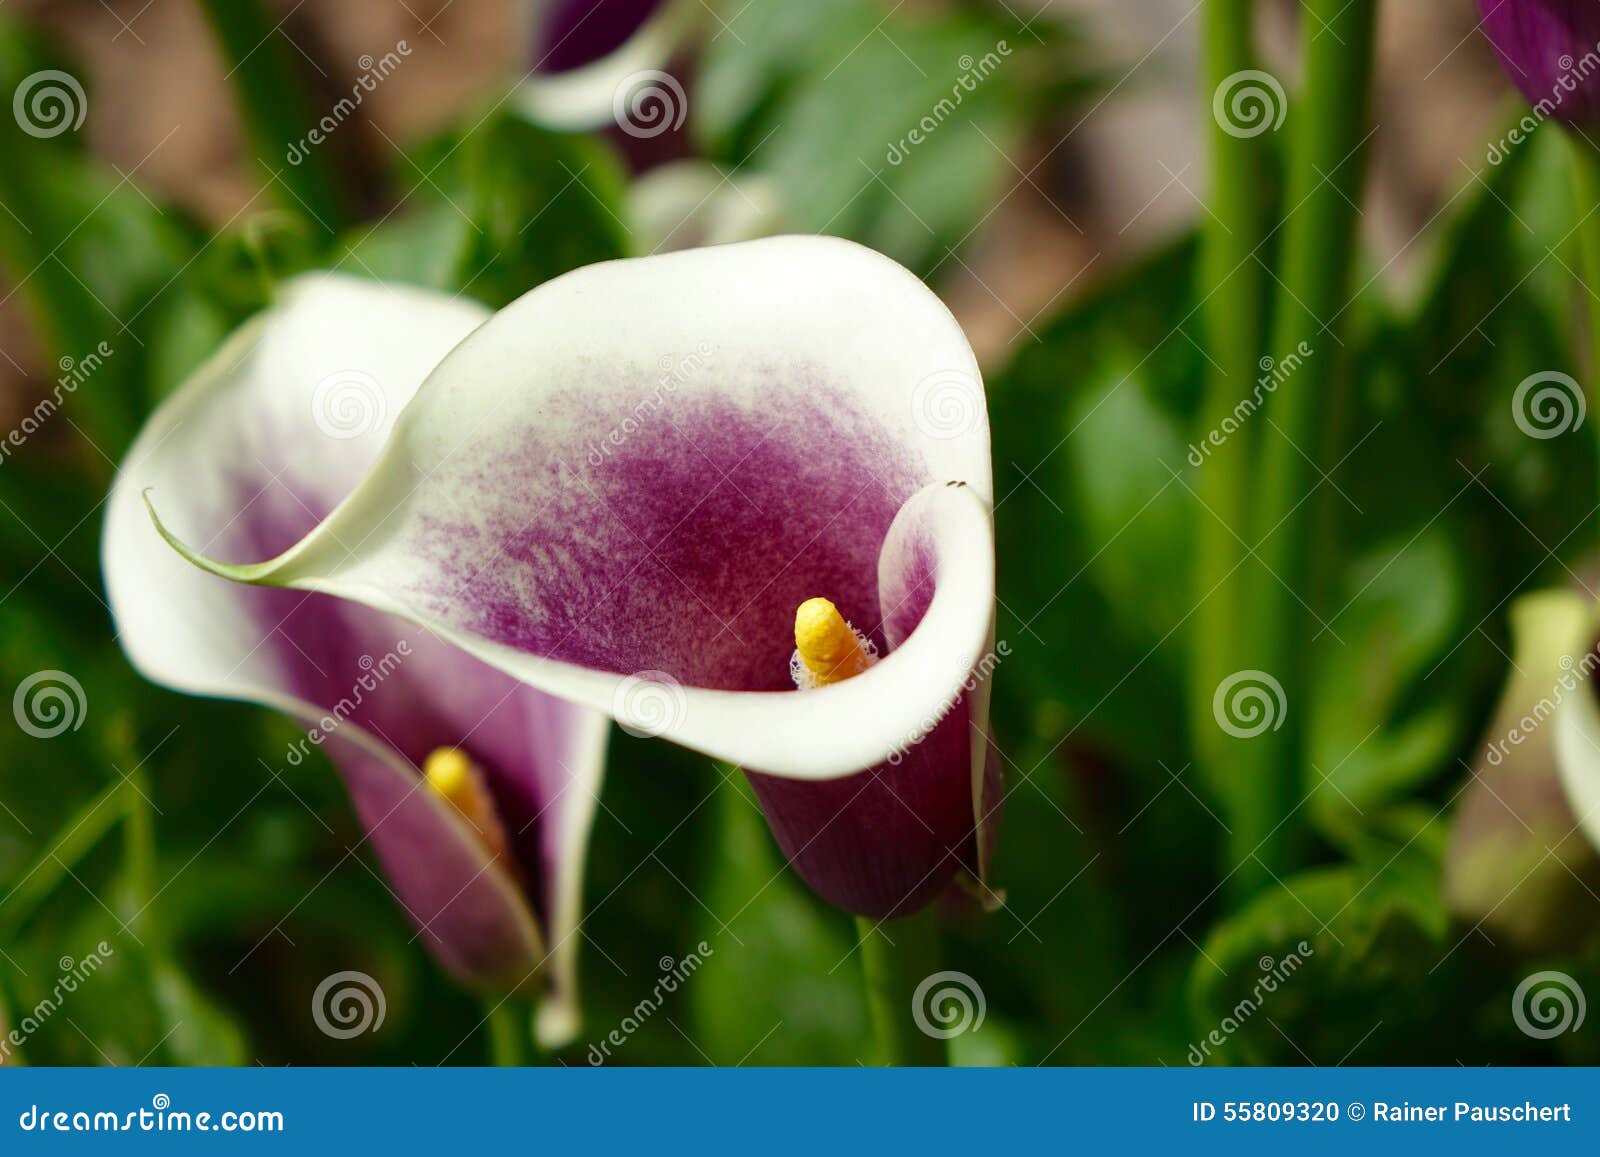 Red and white calla lily stock photo. Image of nature - 55809320